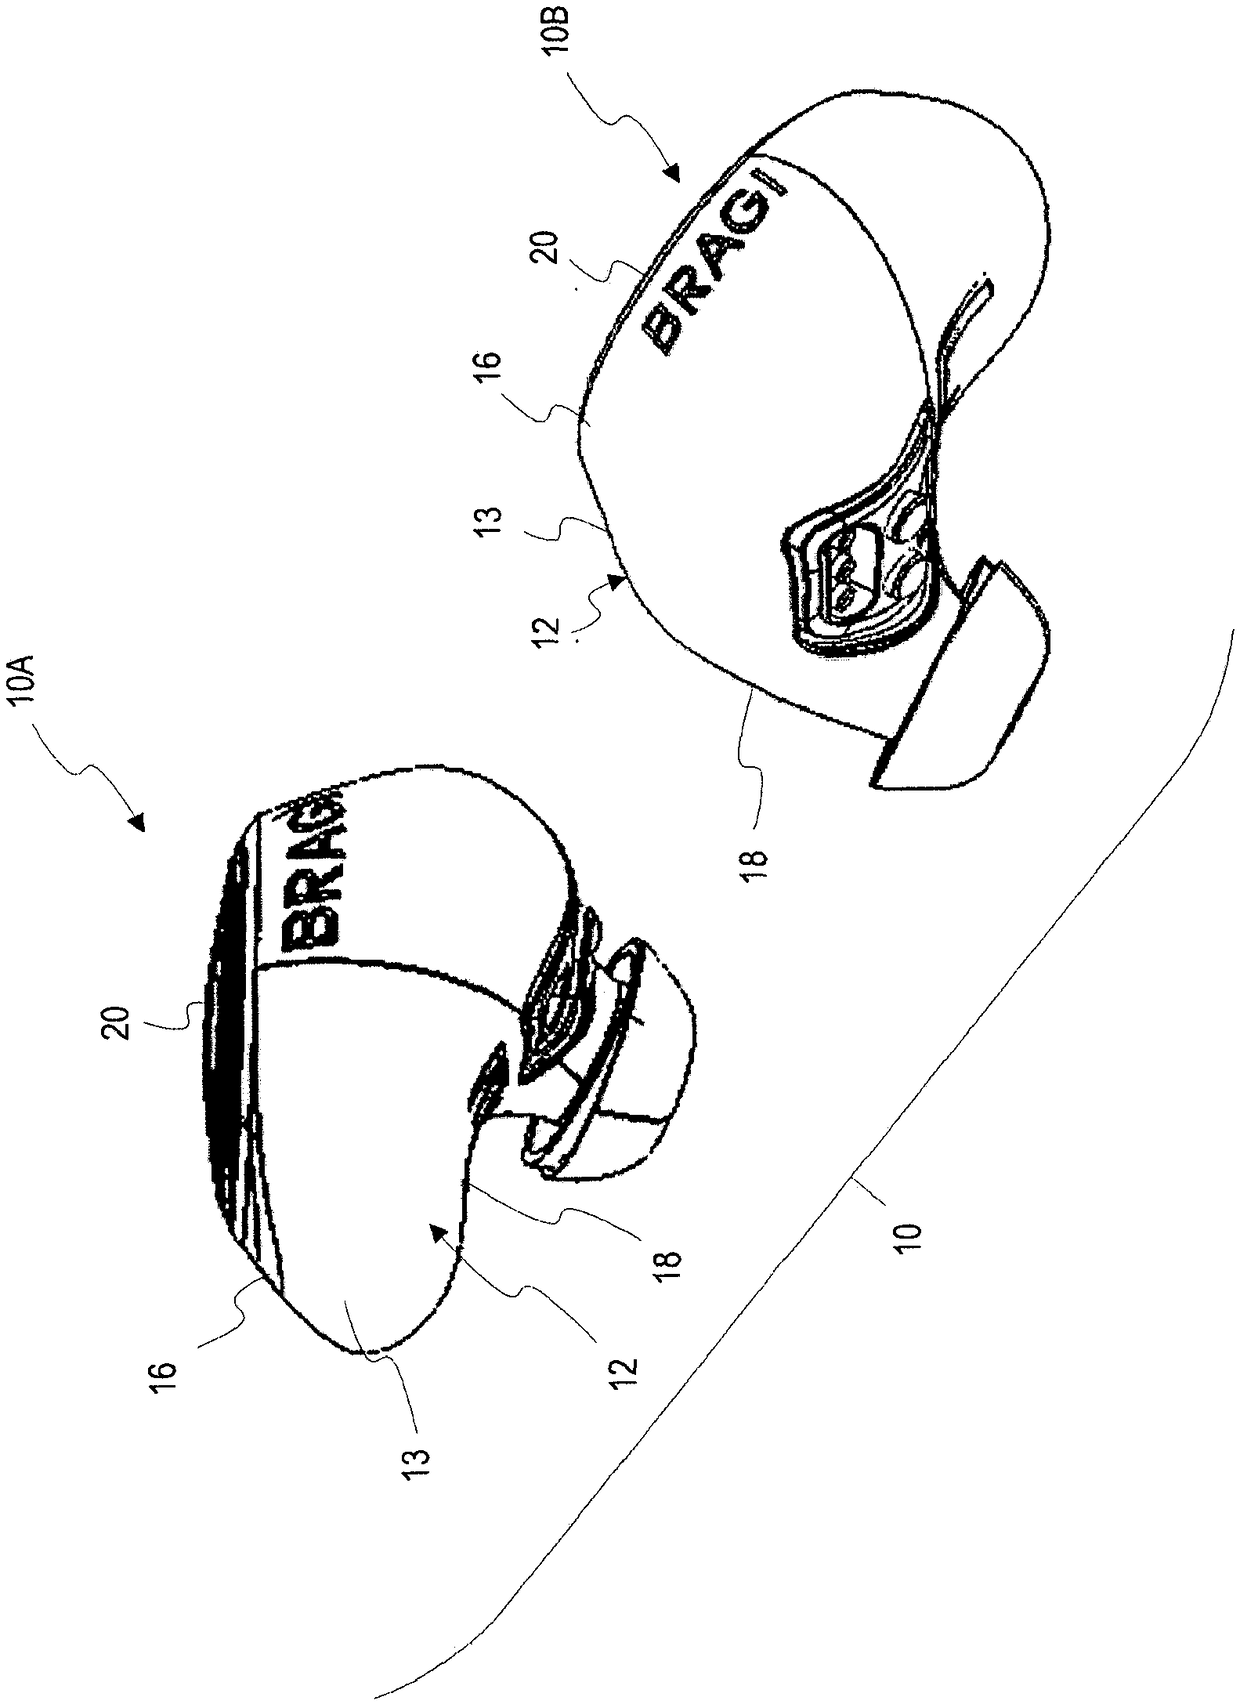 Antenna for use in wearable device